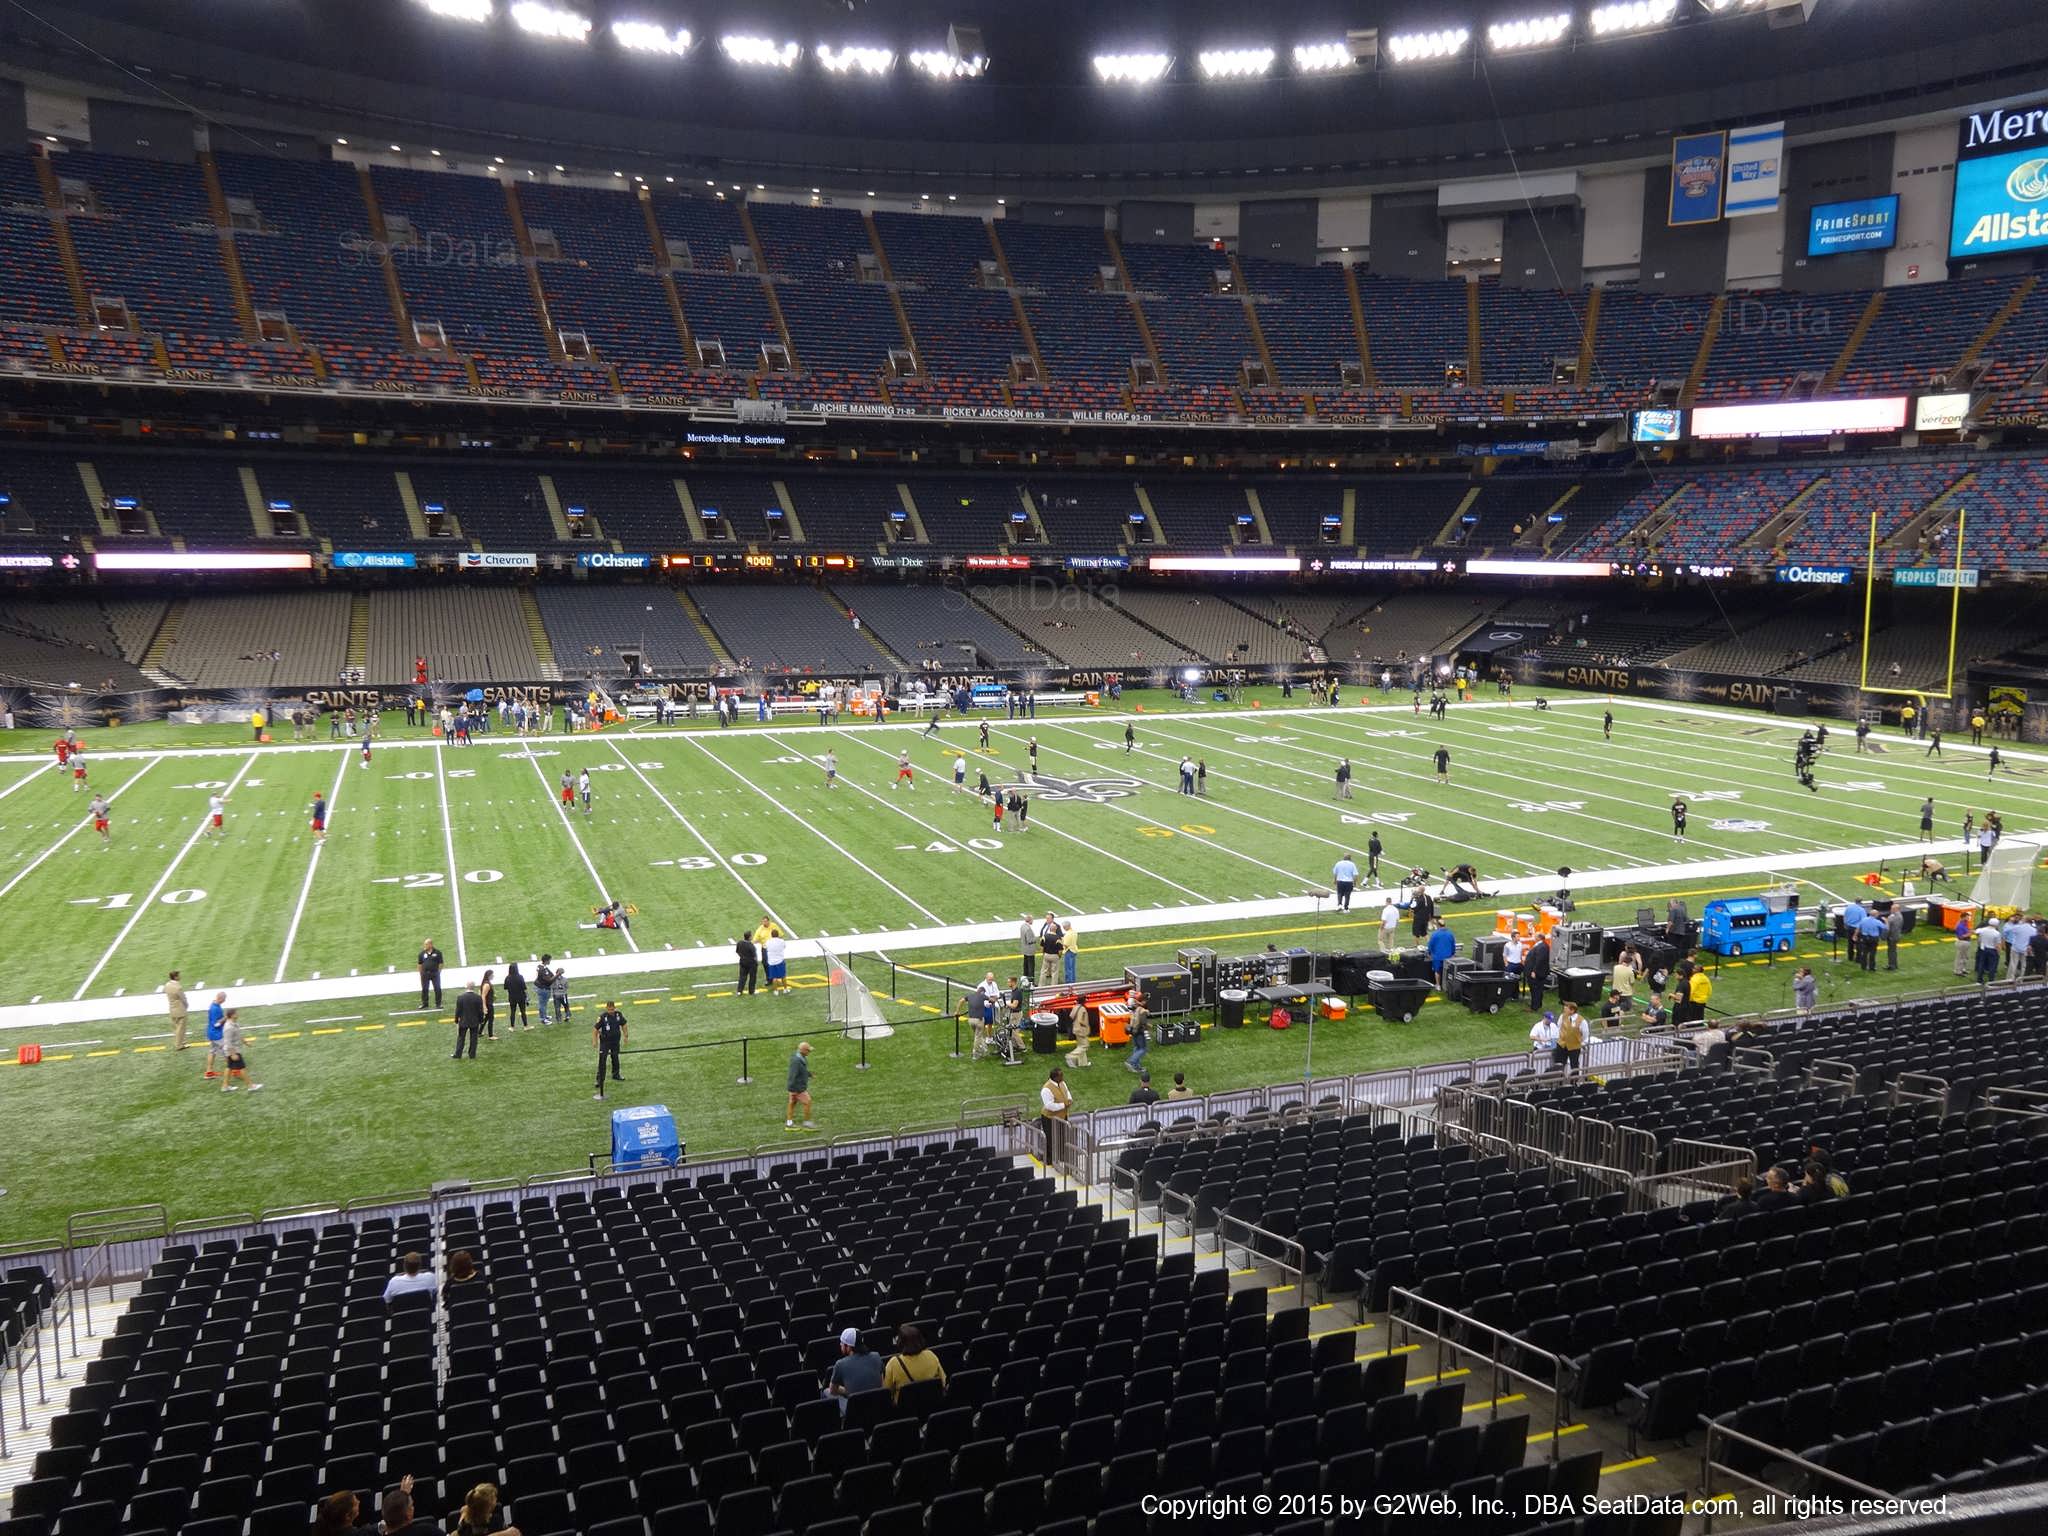 Seat view from section 269 at the Mercedes-Benz Superdome, home of the New Orleans Saints